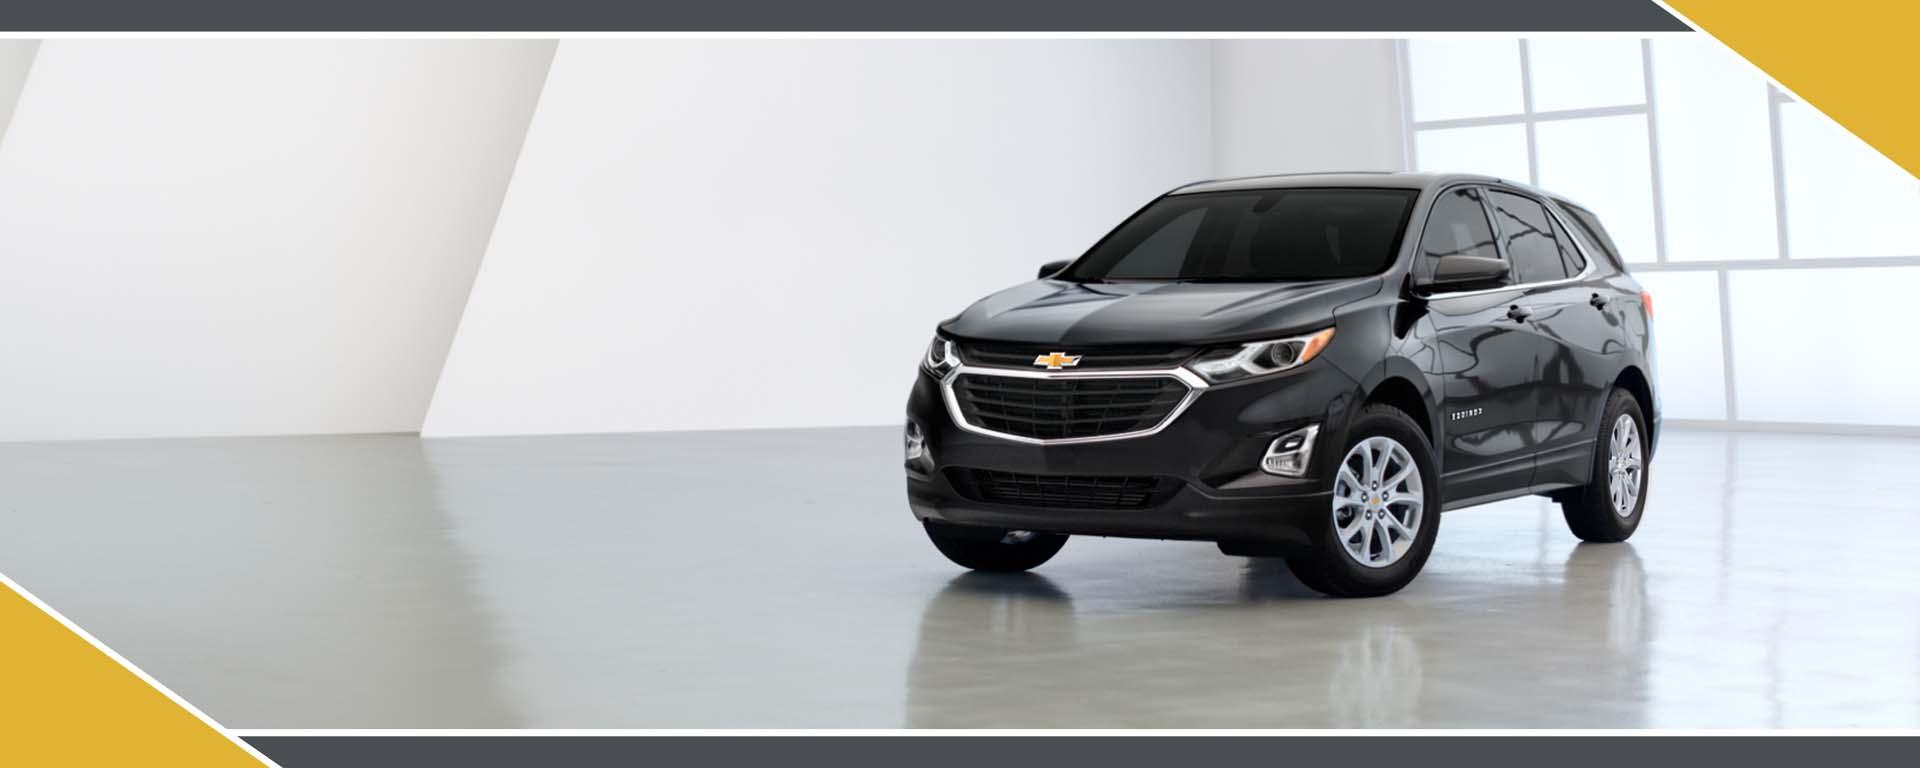 Used Chevy Equinox for Sale in Milford Ohio